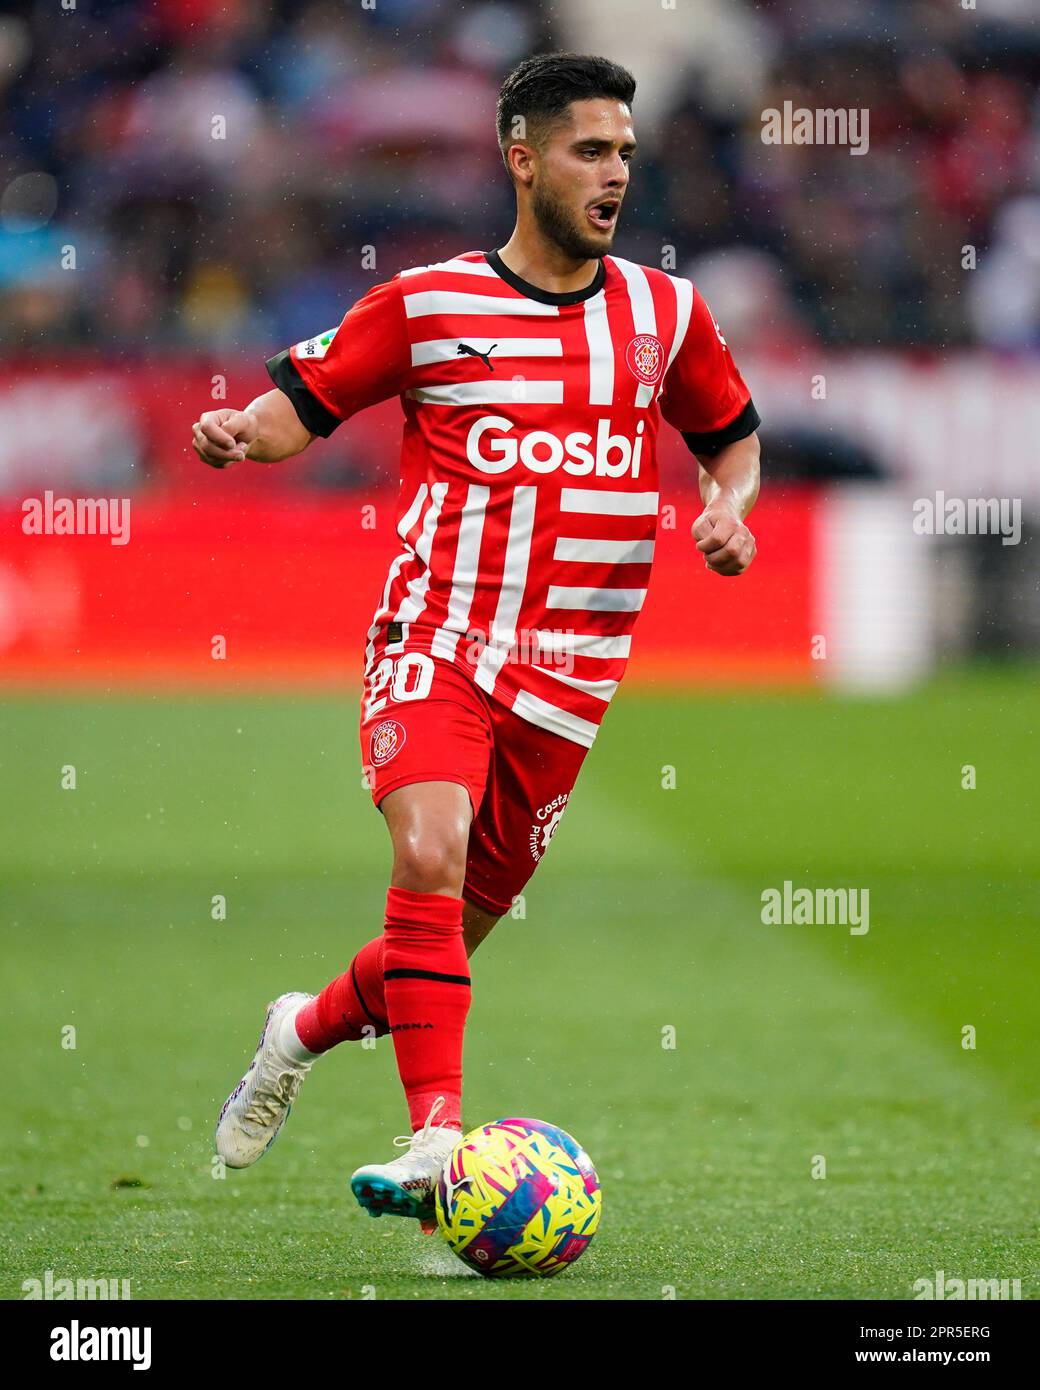 Yan Couto of Girona FC during the La Liga match between Girona FC and Real  Madrid